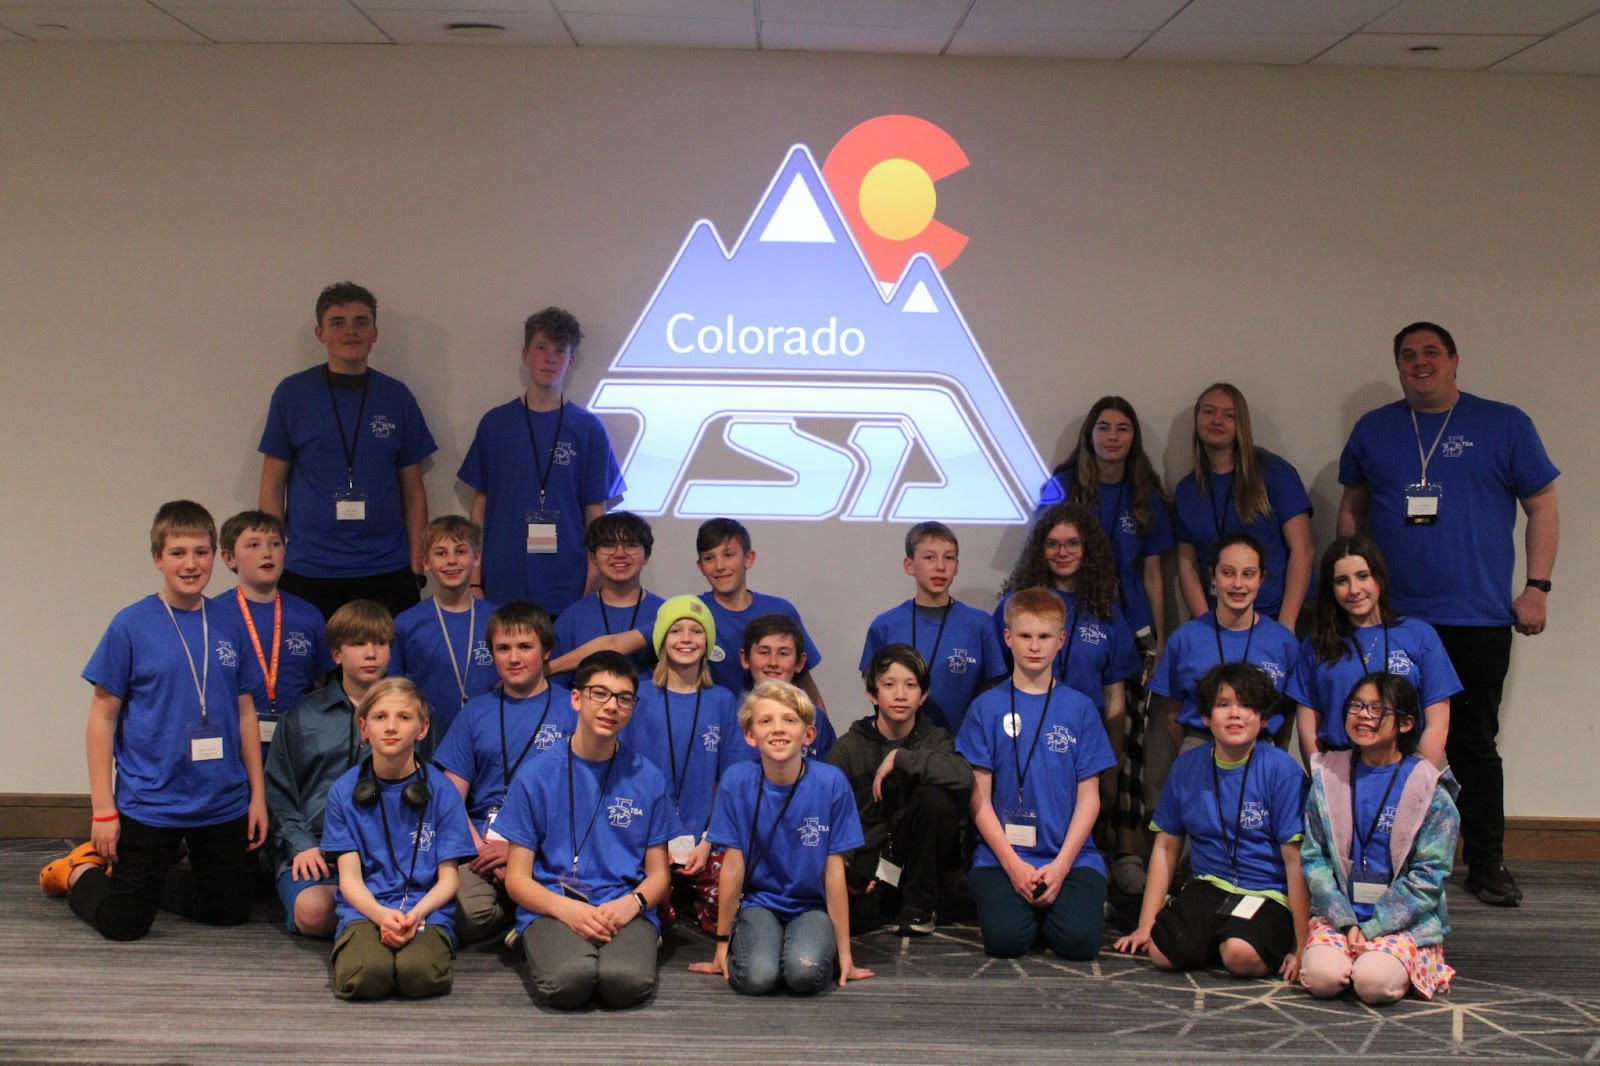 Participants from EMS pose with the Colorado TSA logo against a blank wall.